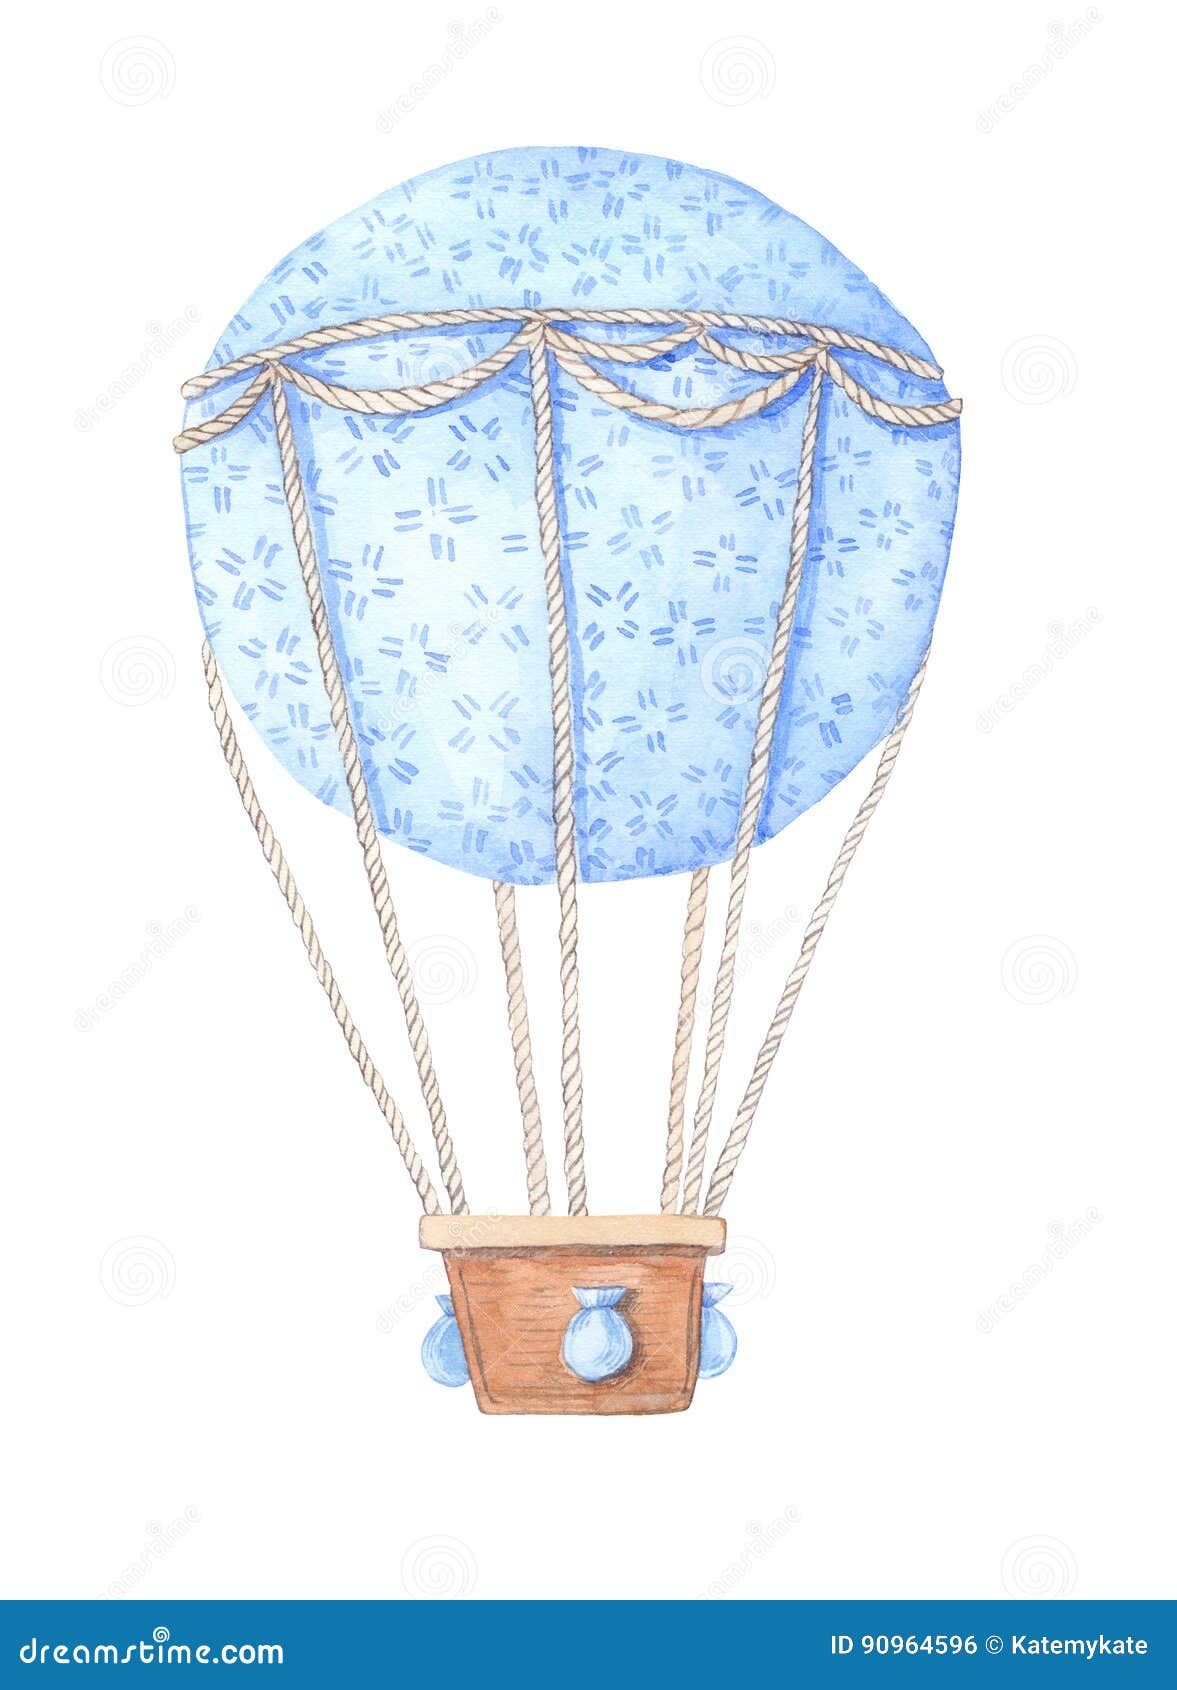 hand drawn watercolor  - hot air balloon in the sky.